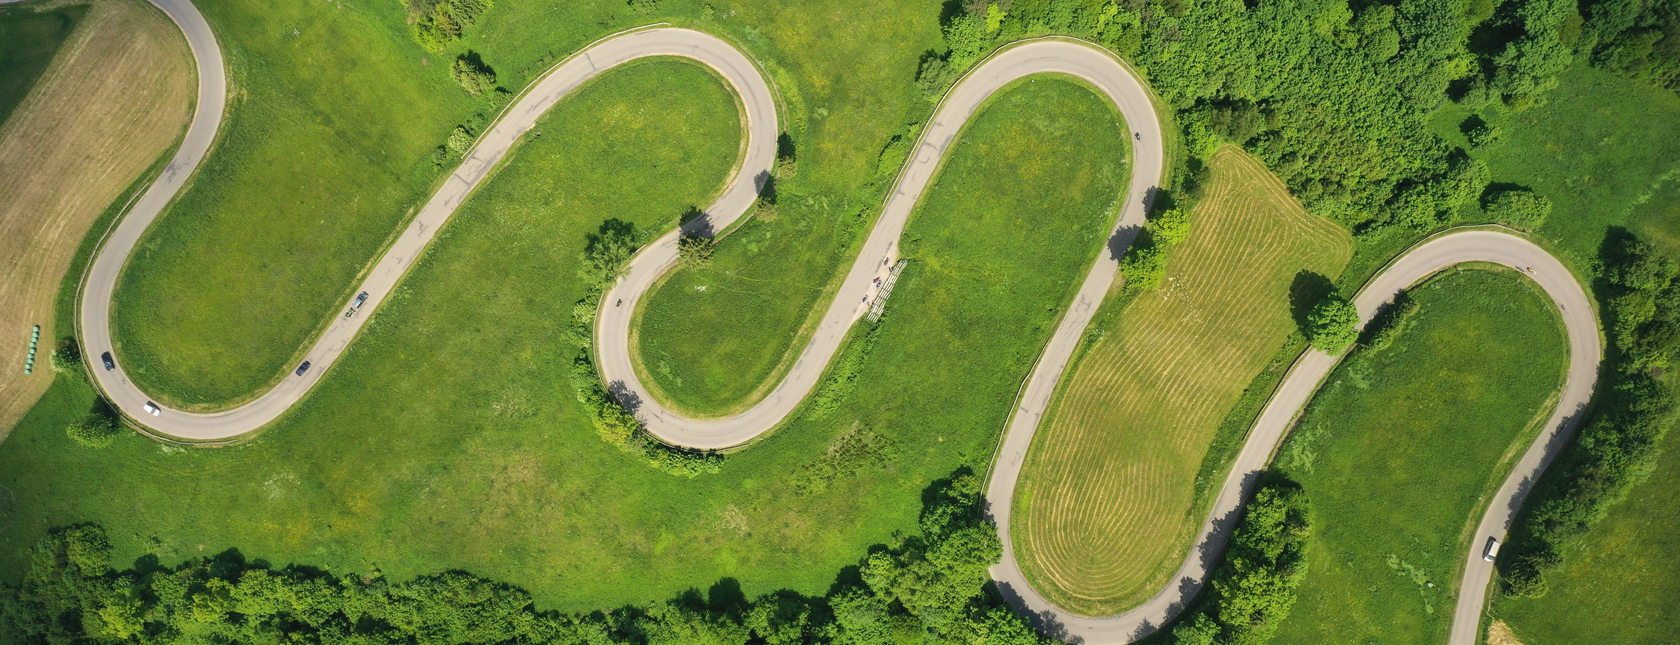 A winding road viewed from above